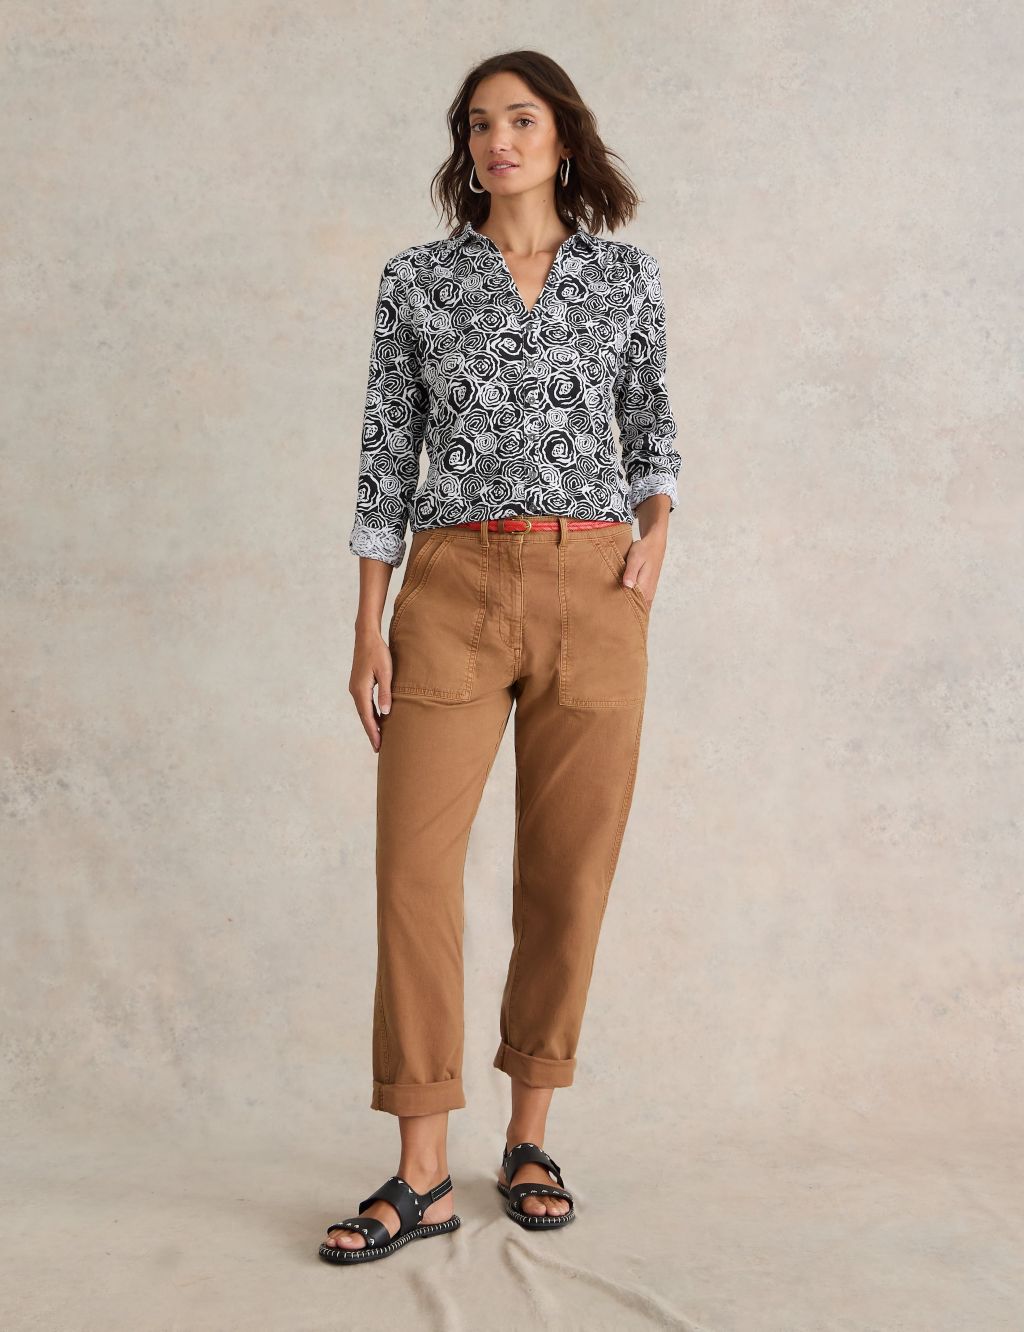 Cotton Rich Chinos with Linen image 1